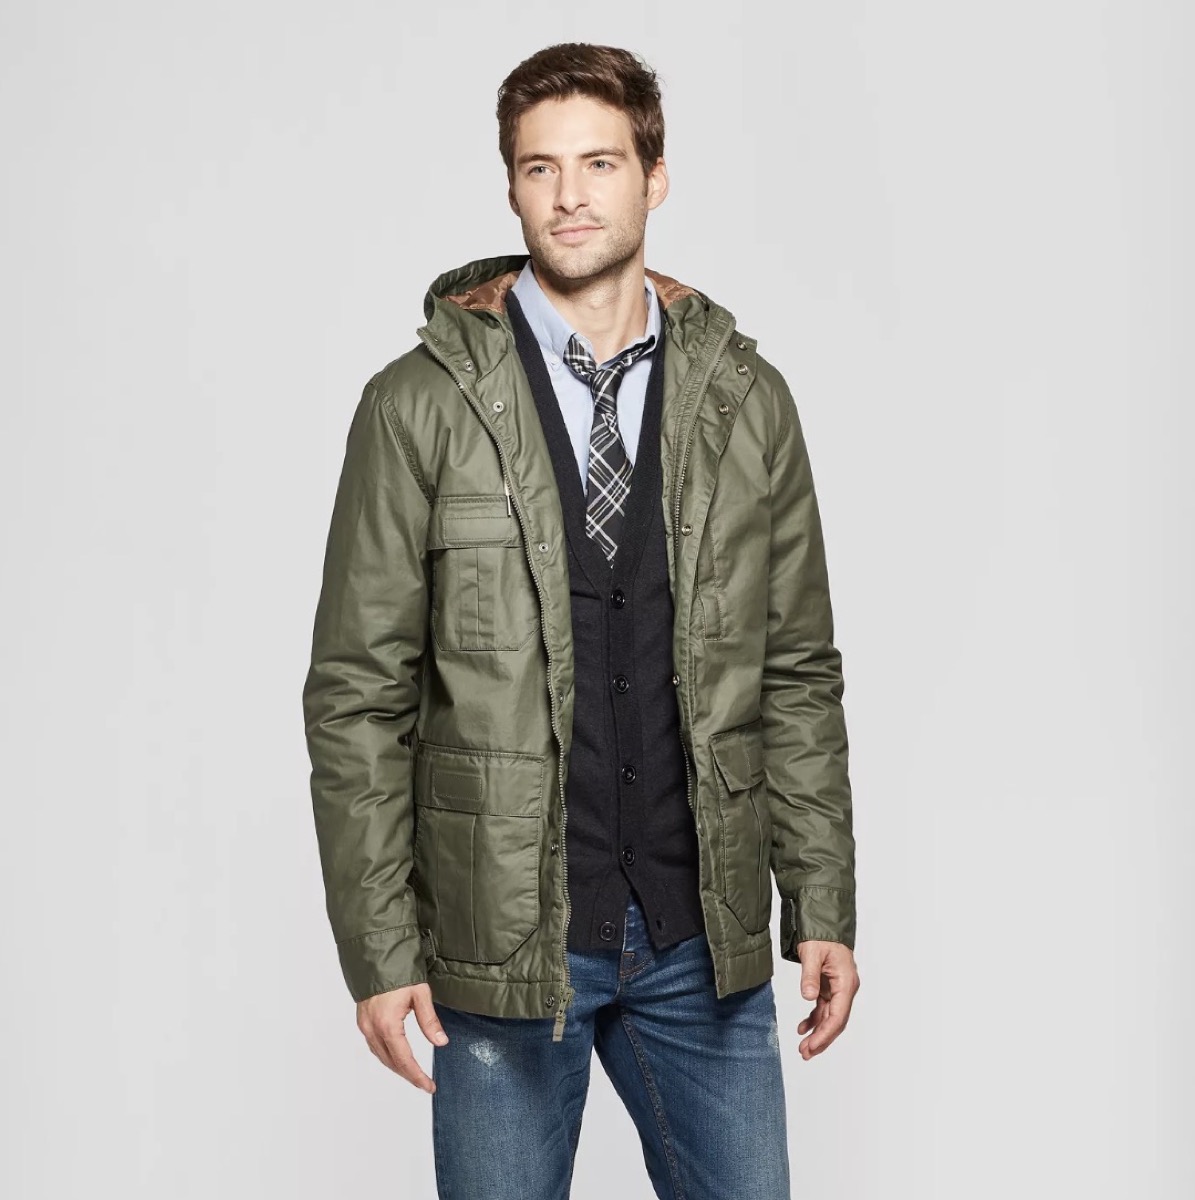 man in green coat and jeans and tie, winter coats for men